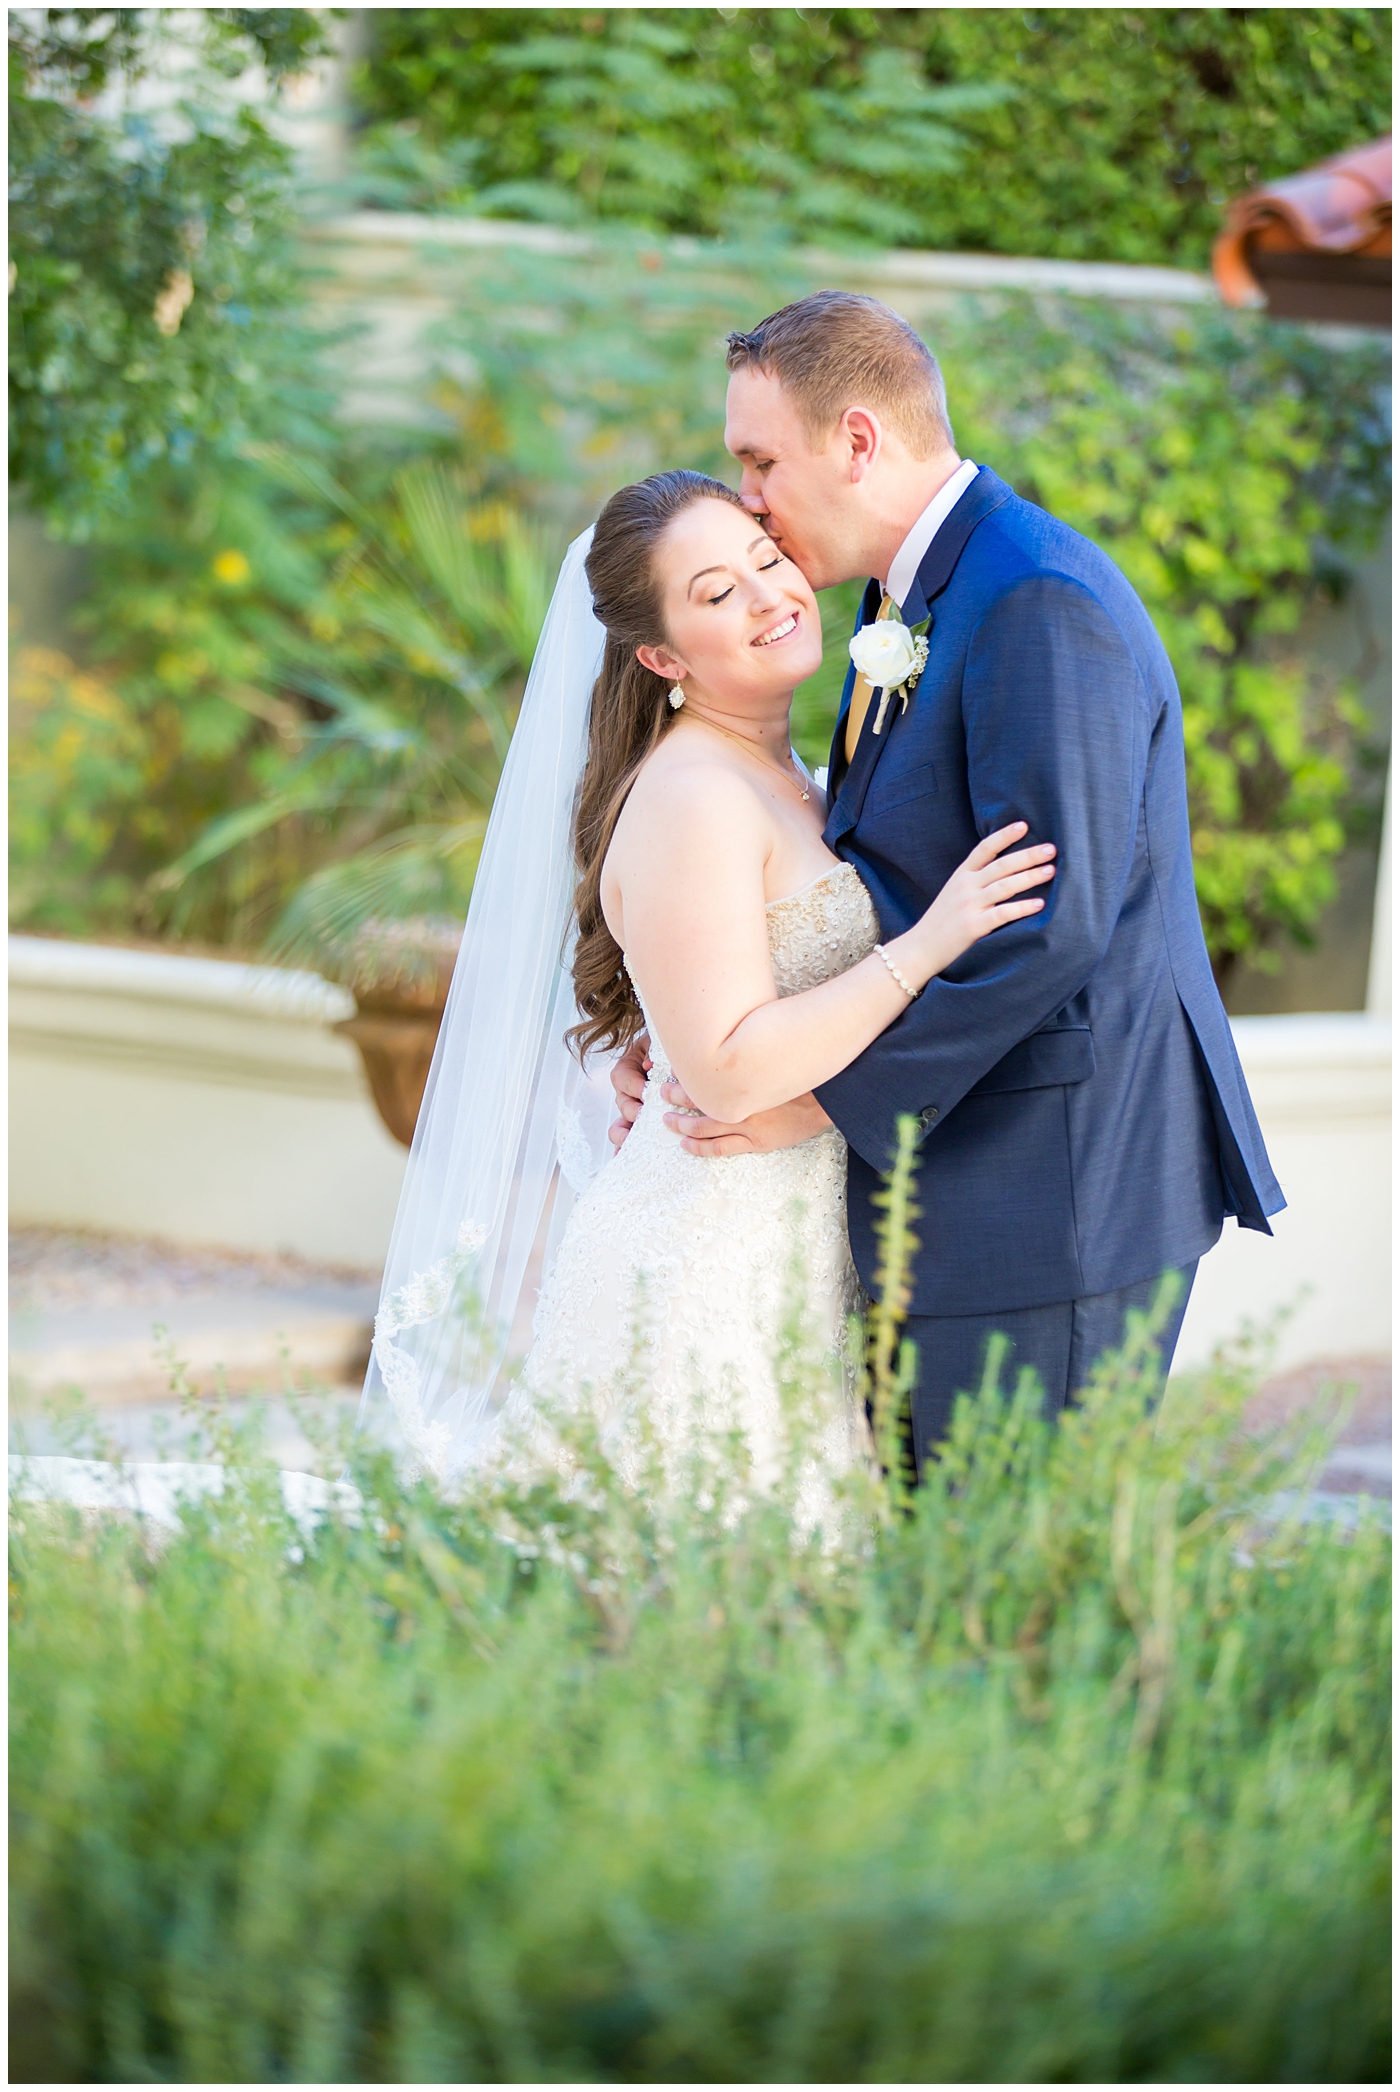 bride in lillian lottie couture wedding dress with white rose bouquet and groom in navy blue suit from men's warehouse first look